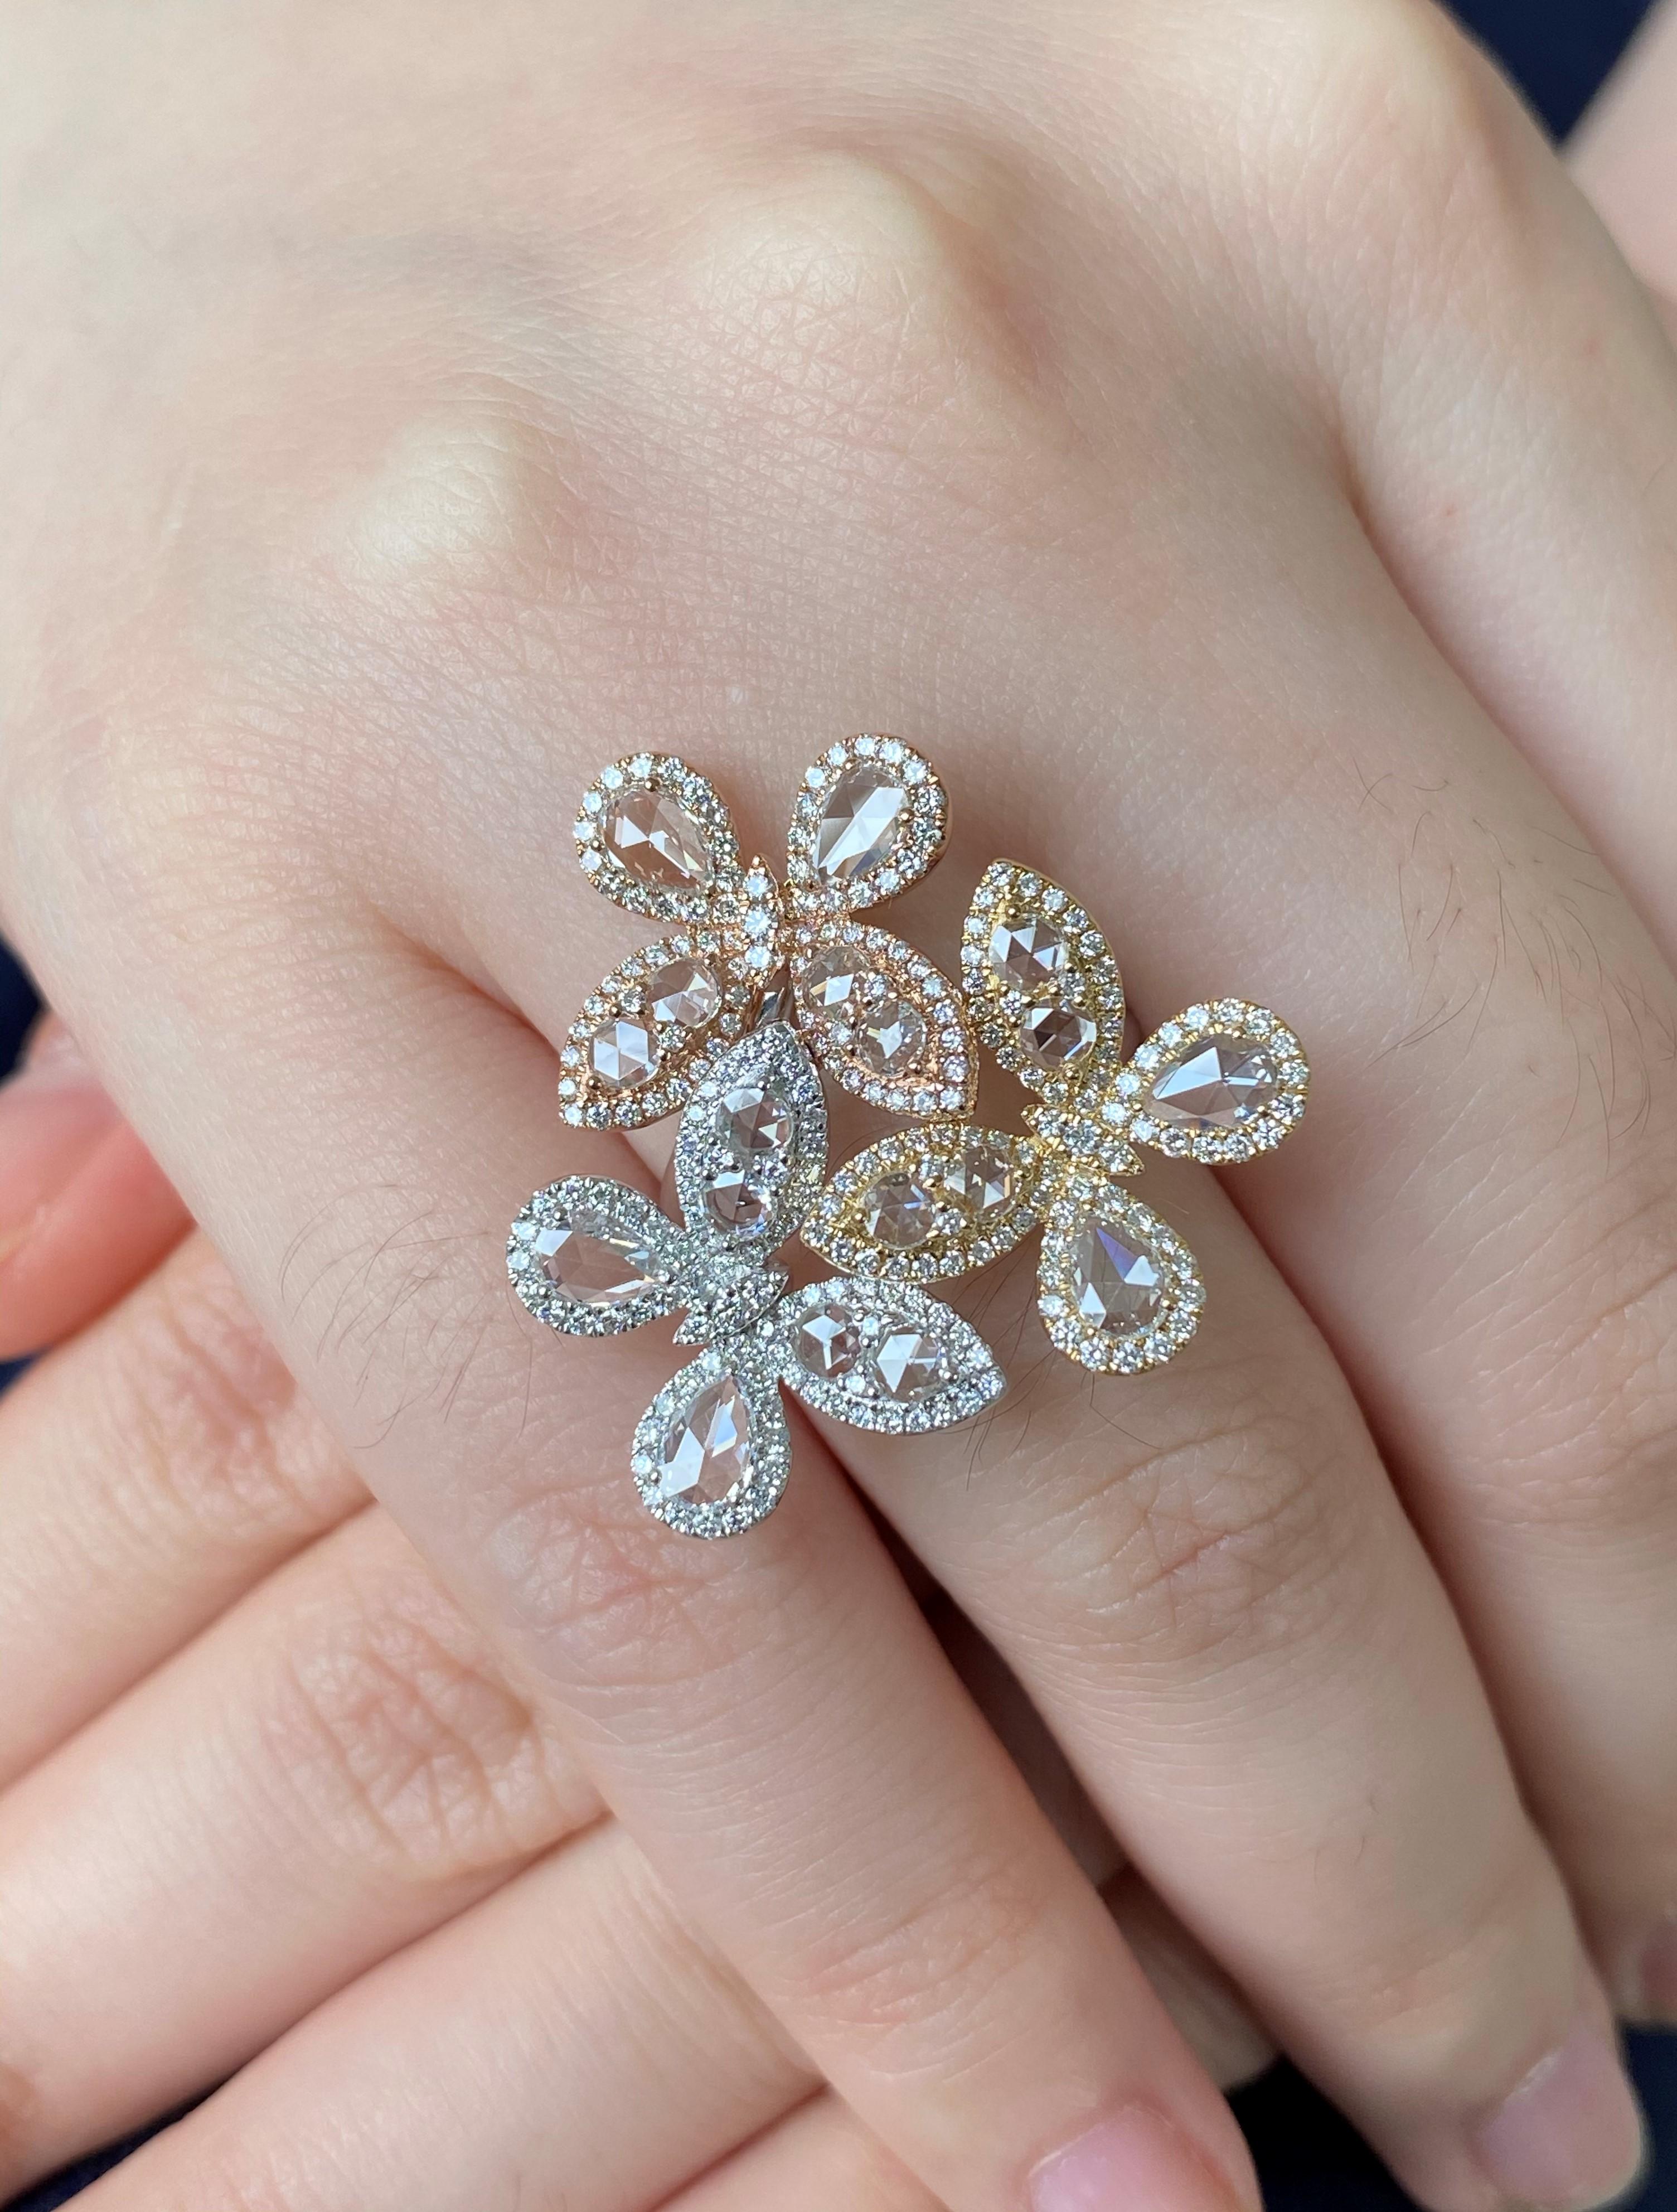 JR Rose Cut Diamond Triple Flower 18 Karat Gold Ring

Our opulent and eccentric Triple flower diamond ring is an absolute show-stopper. The three color gold in it enhances it's look by many folds. 

Ring Size Europe 54 (US 6.75) ,
Ring Size can be